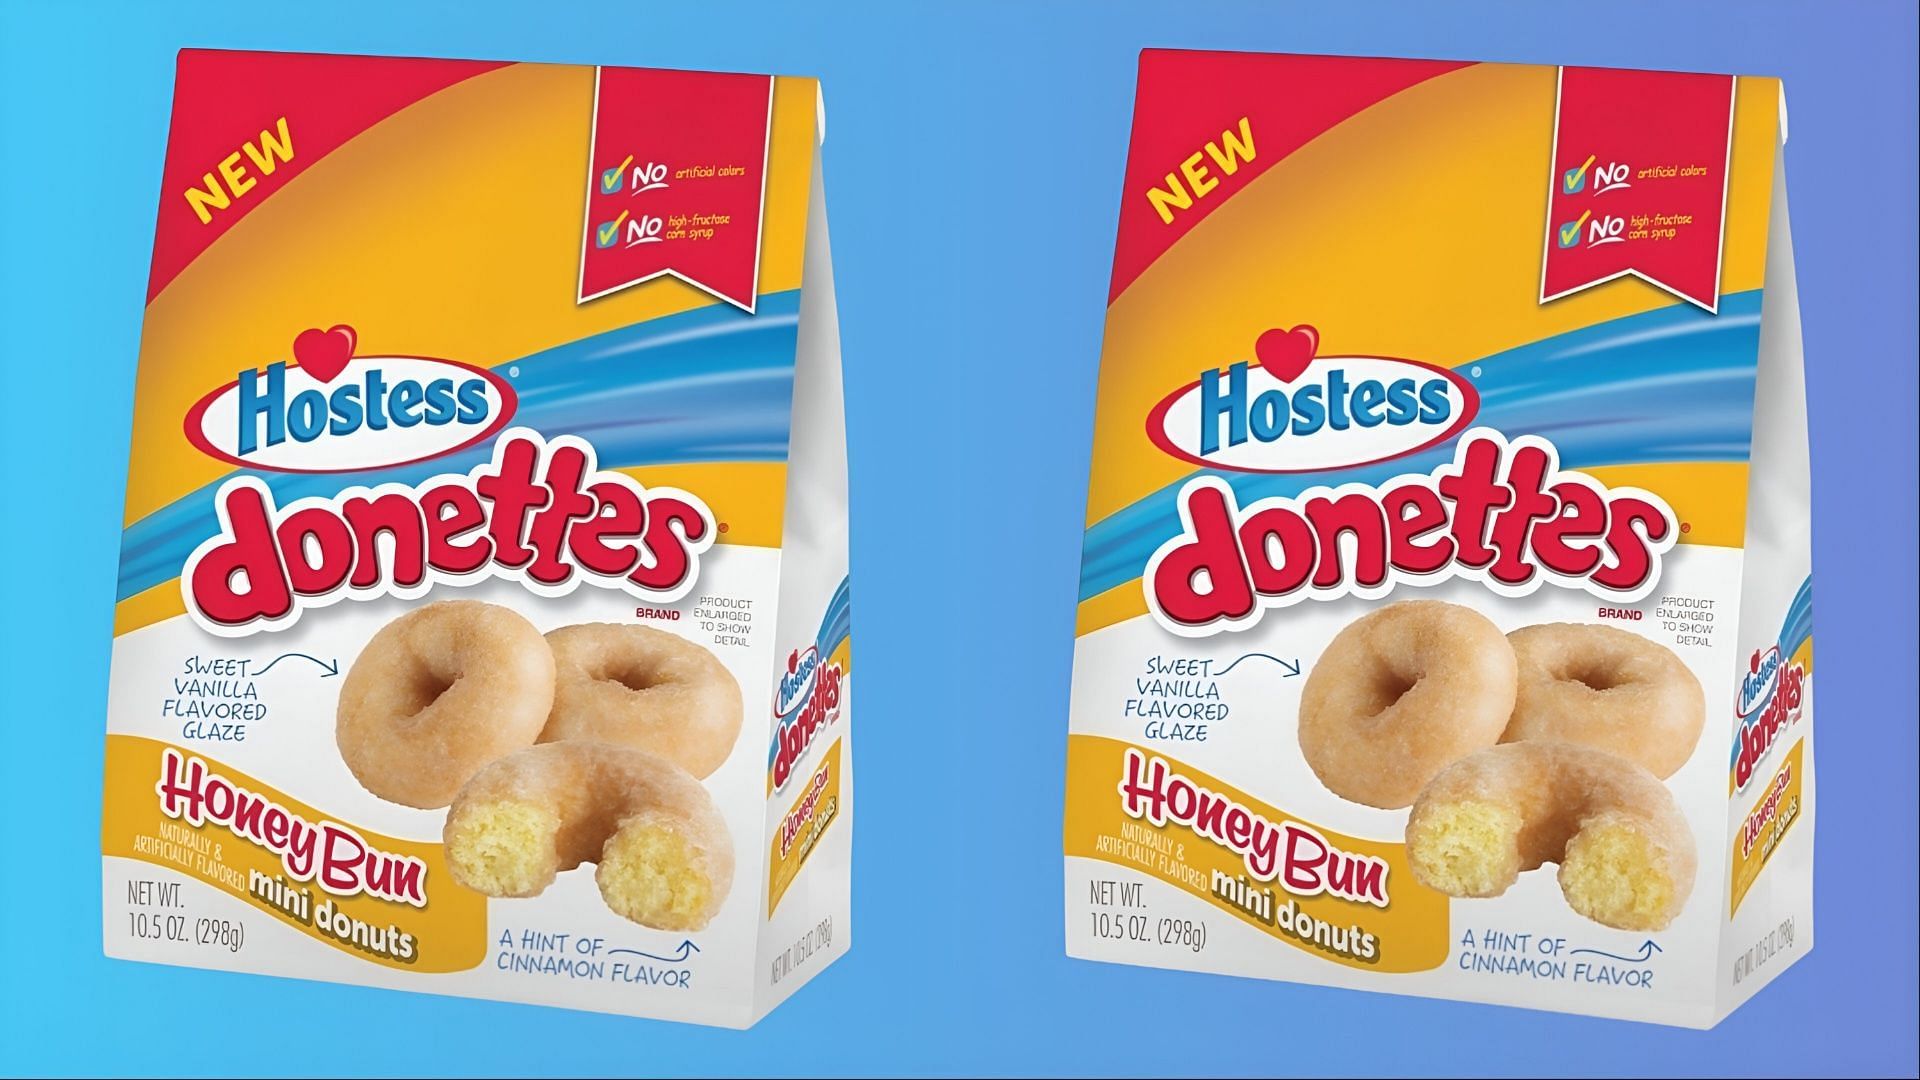 The HoneyBun Donettes will be hitting major stores in early March (Image via Hostess / J. M. Smucker Co.)